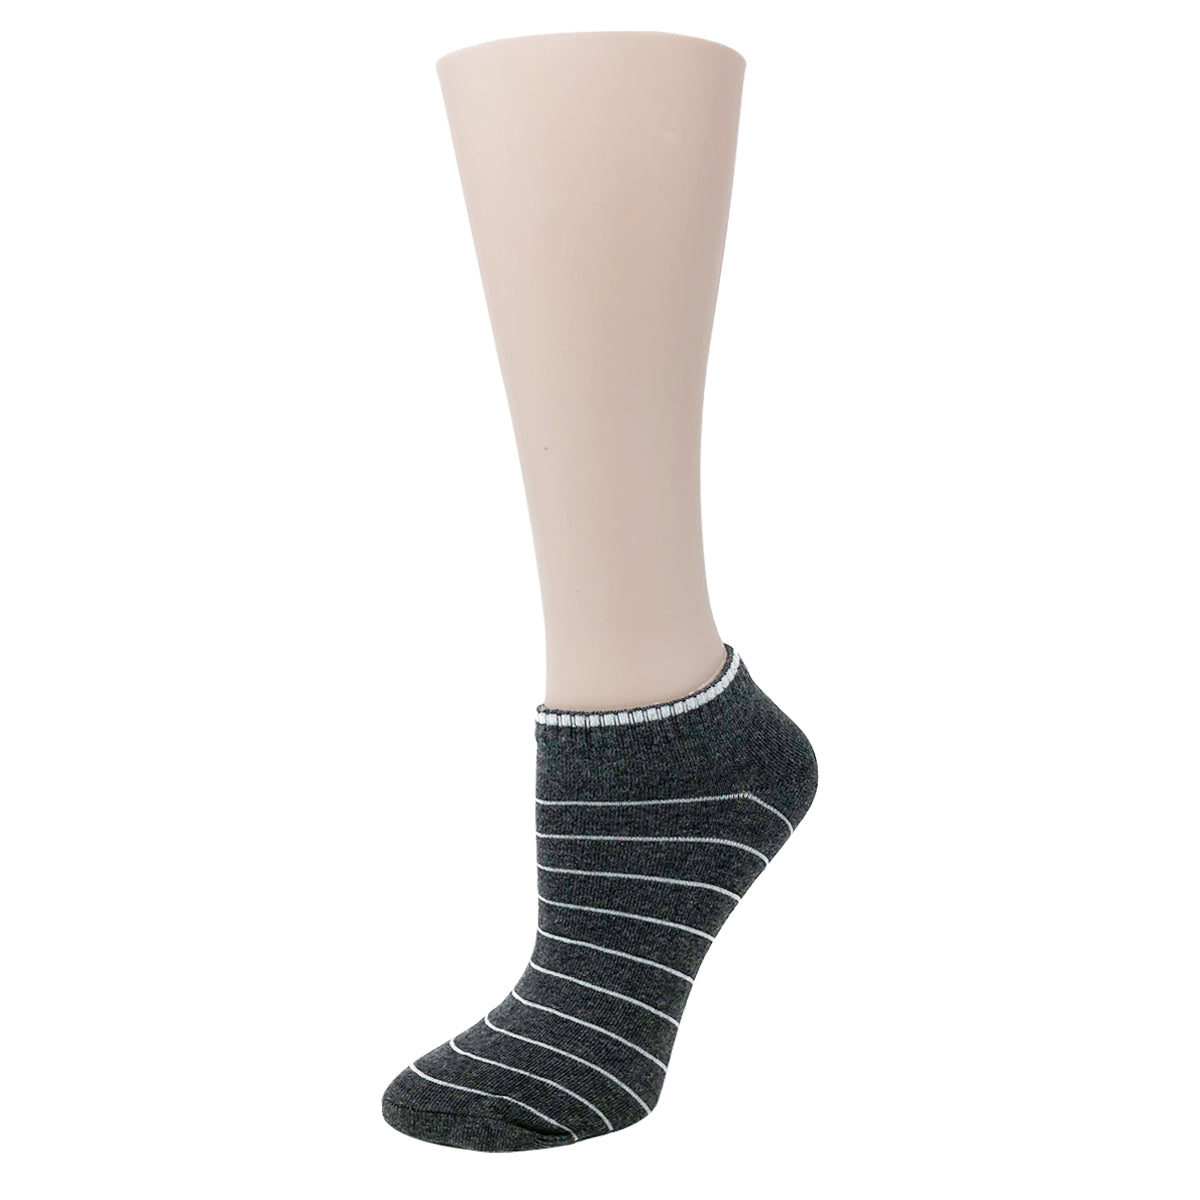 Wrapables Unisex No Show Ankle Socks (Set of 5)